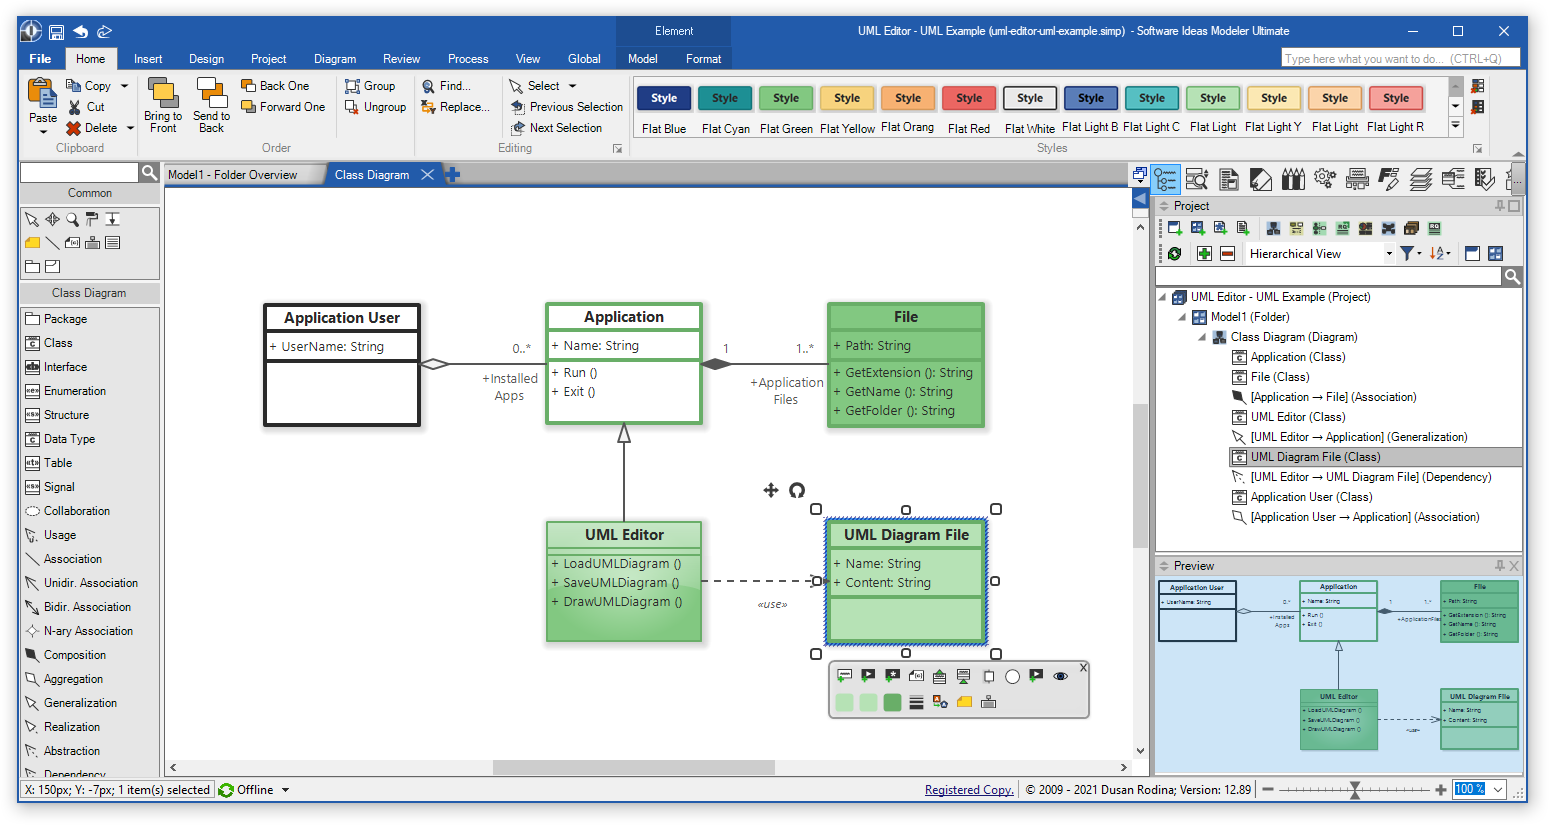 Diagramming with Software Ideas Modeler 12.89